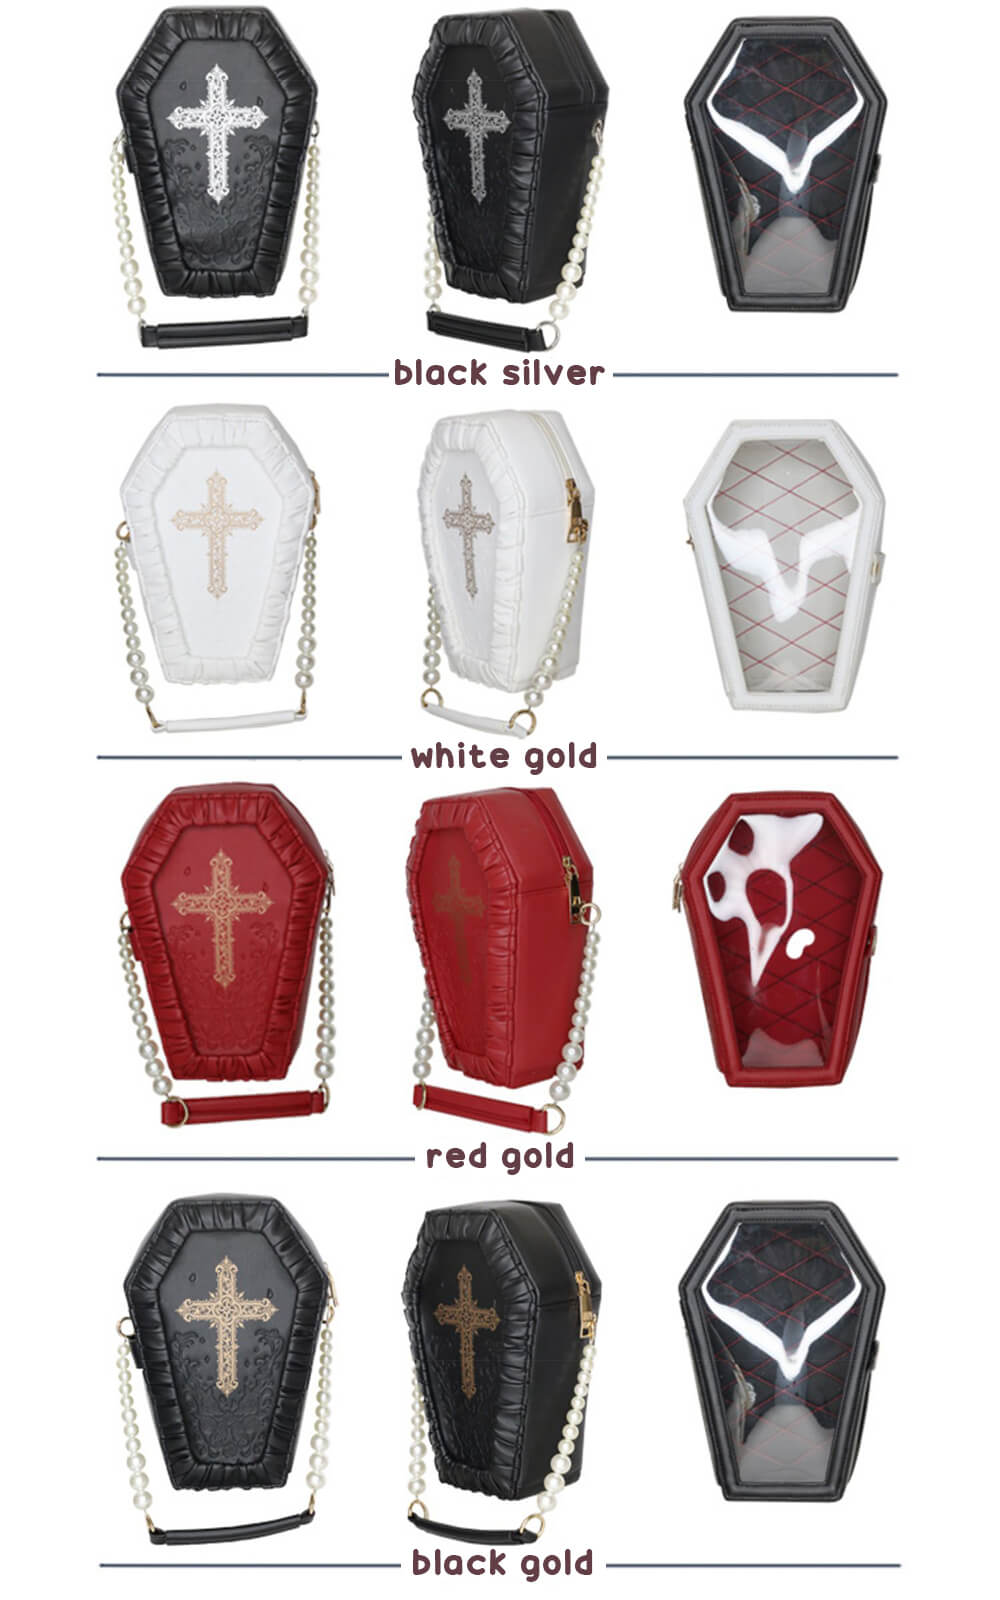 front-side-back-position-display-of-the-rose-flower-cross-ita-coffin-bag-with-pearl-chain